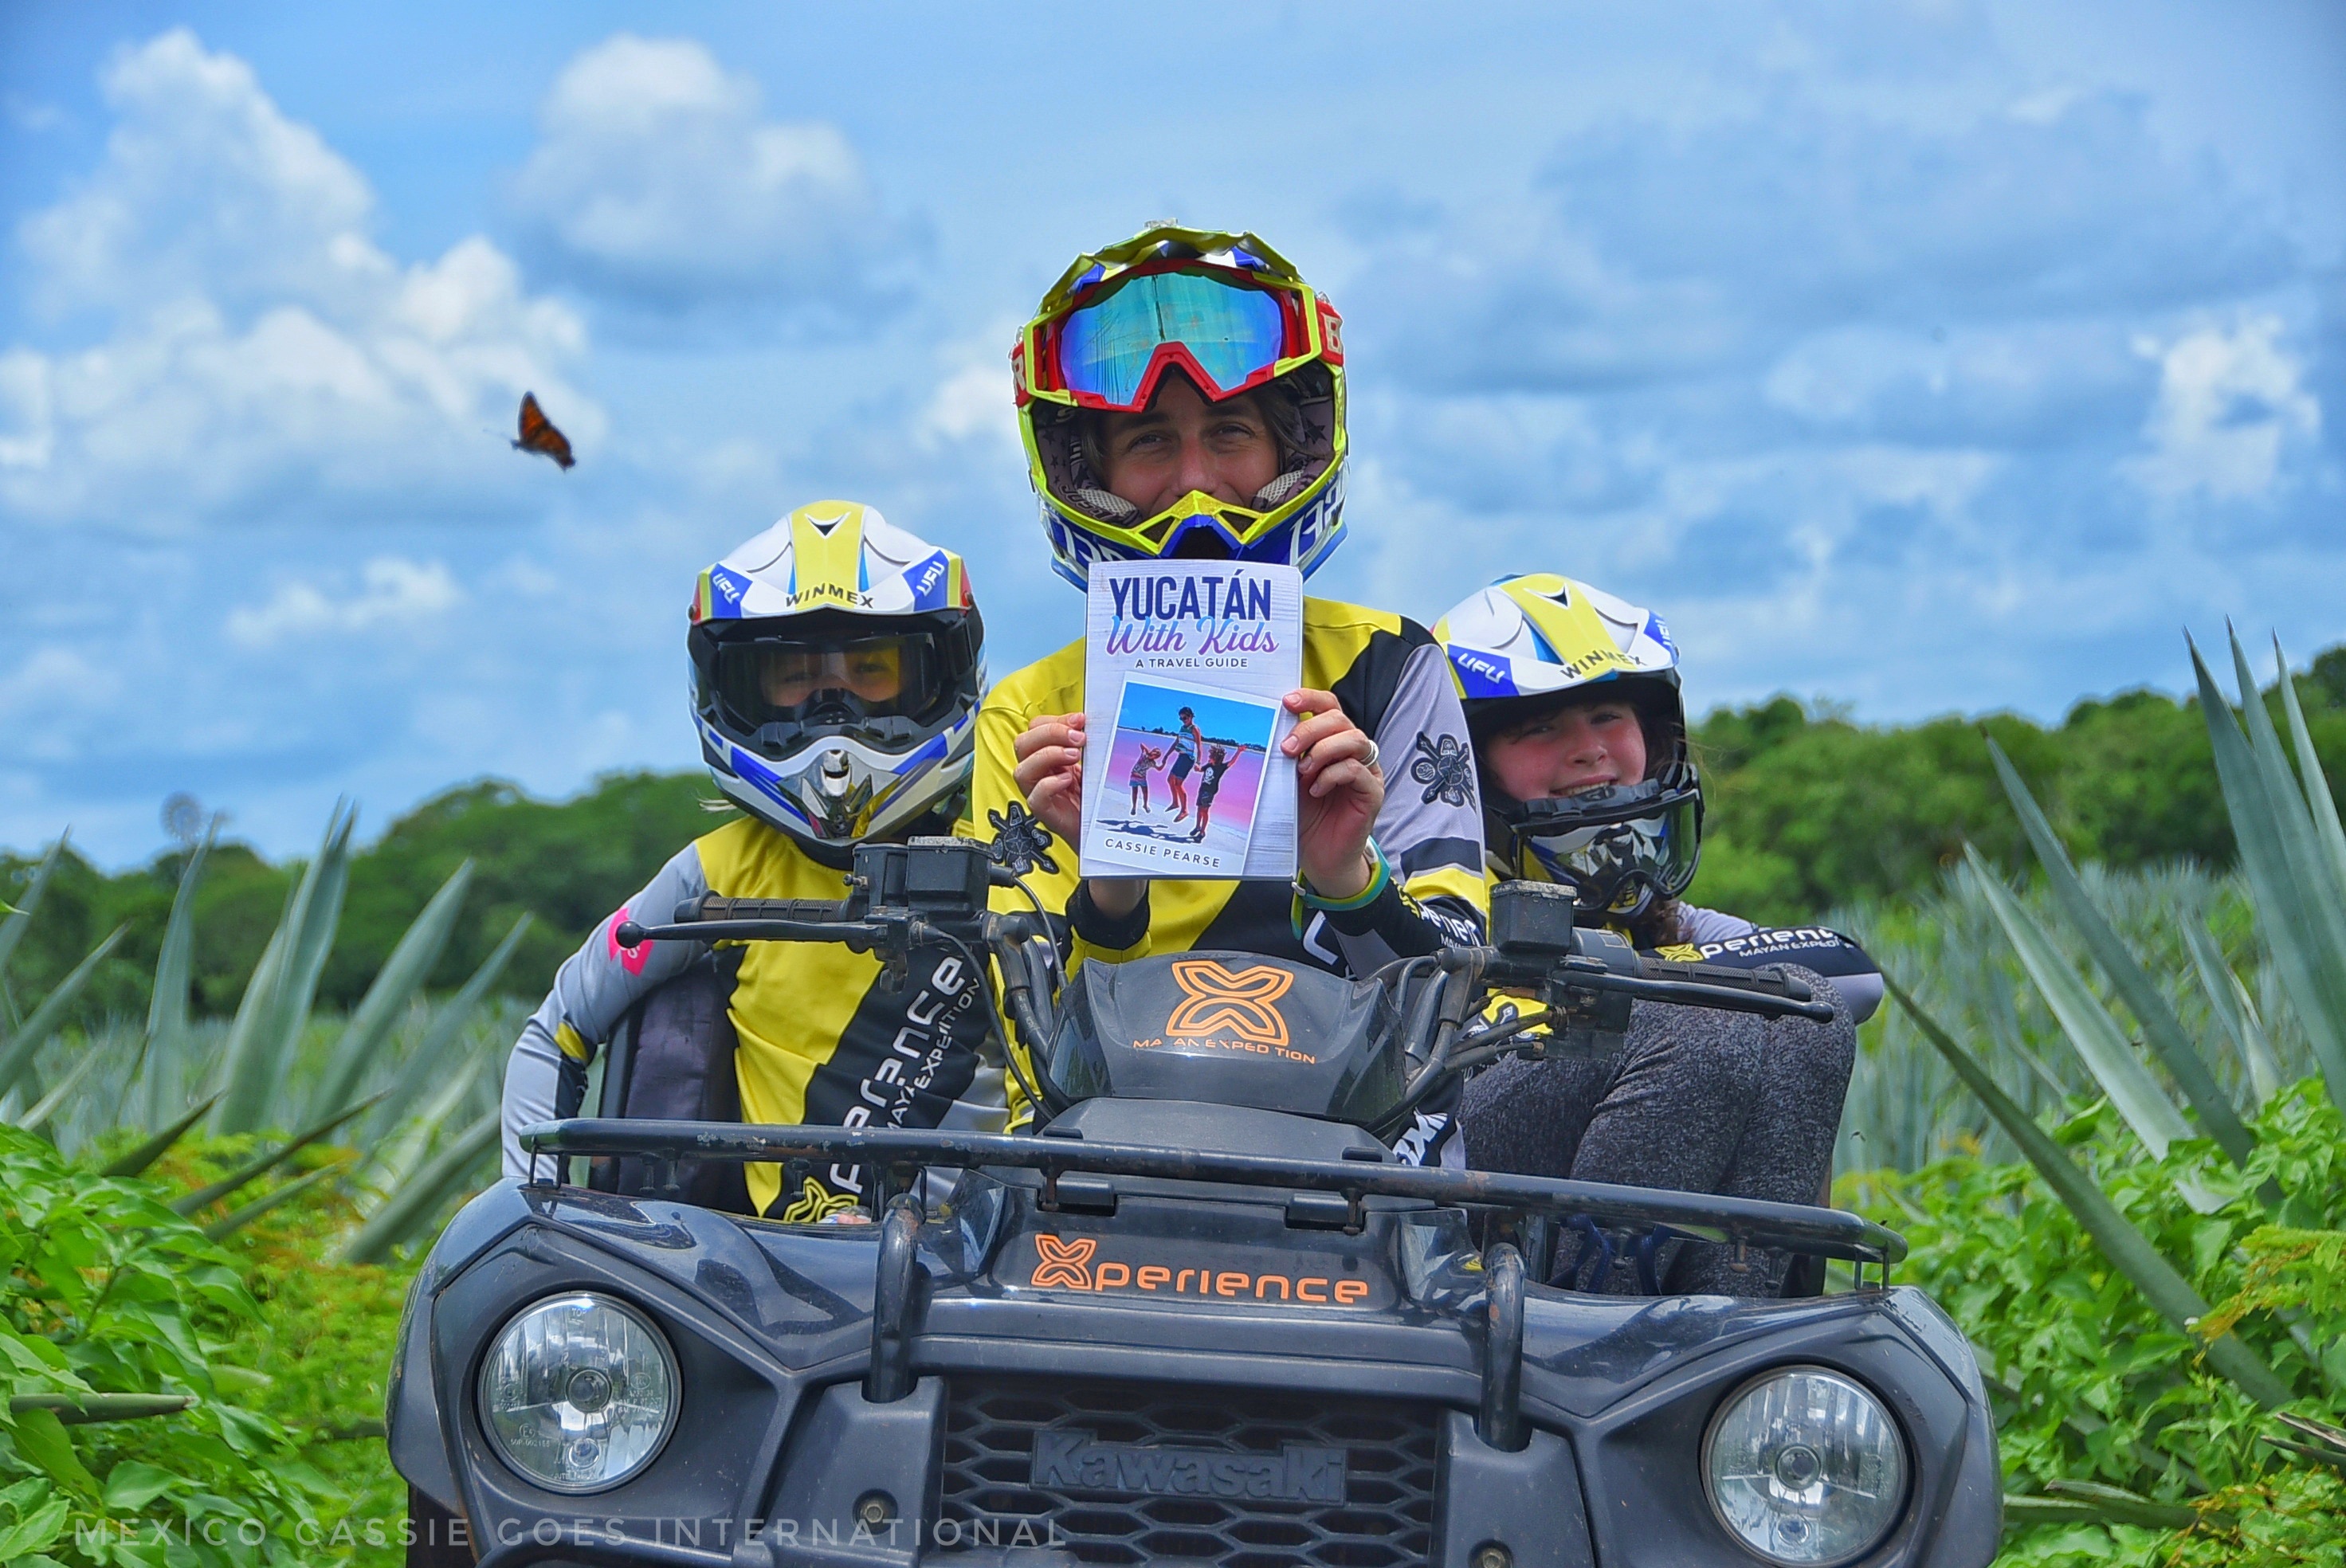 Adult and two children on an ATV. All with helmets and yellow/grey tops. Adult holding a copy of Mexico Cassie's Travel Guide to Yucatan